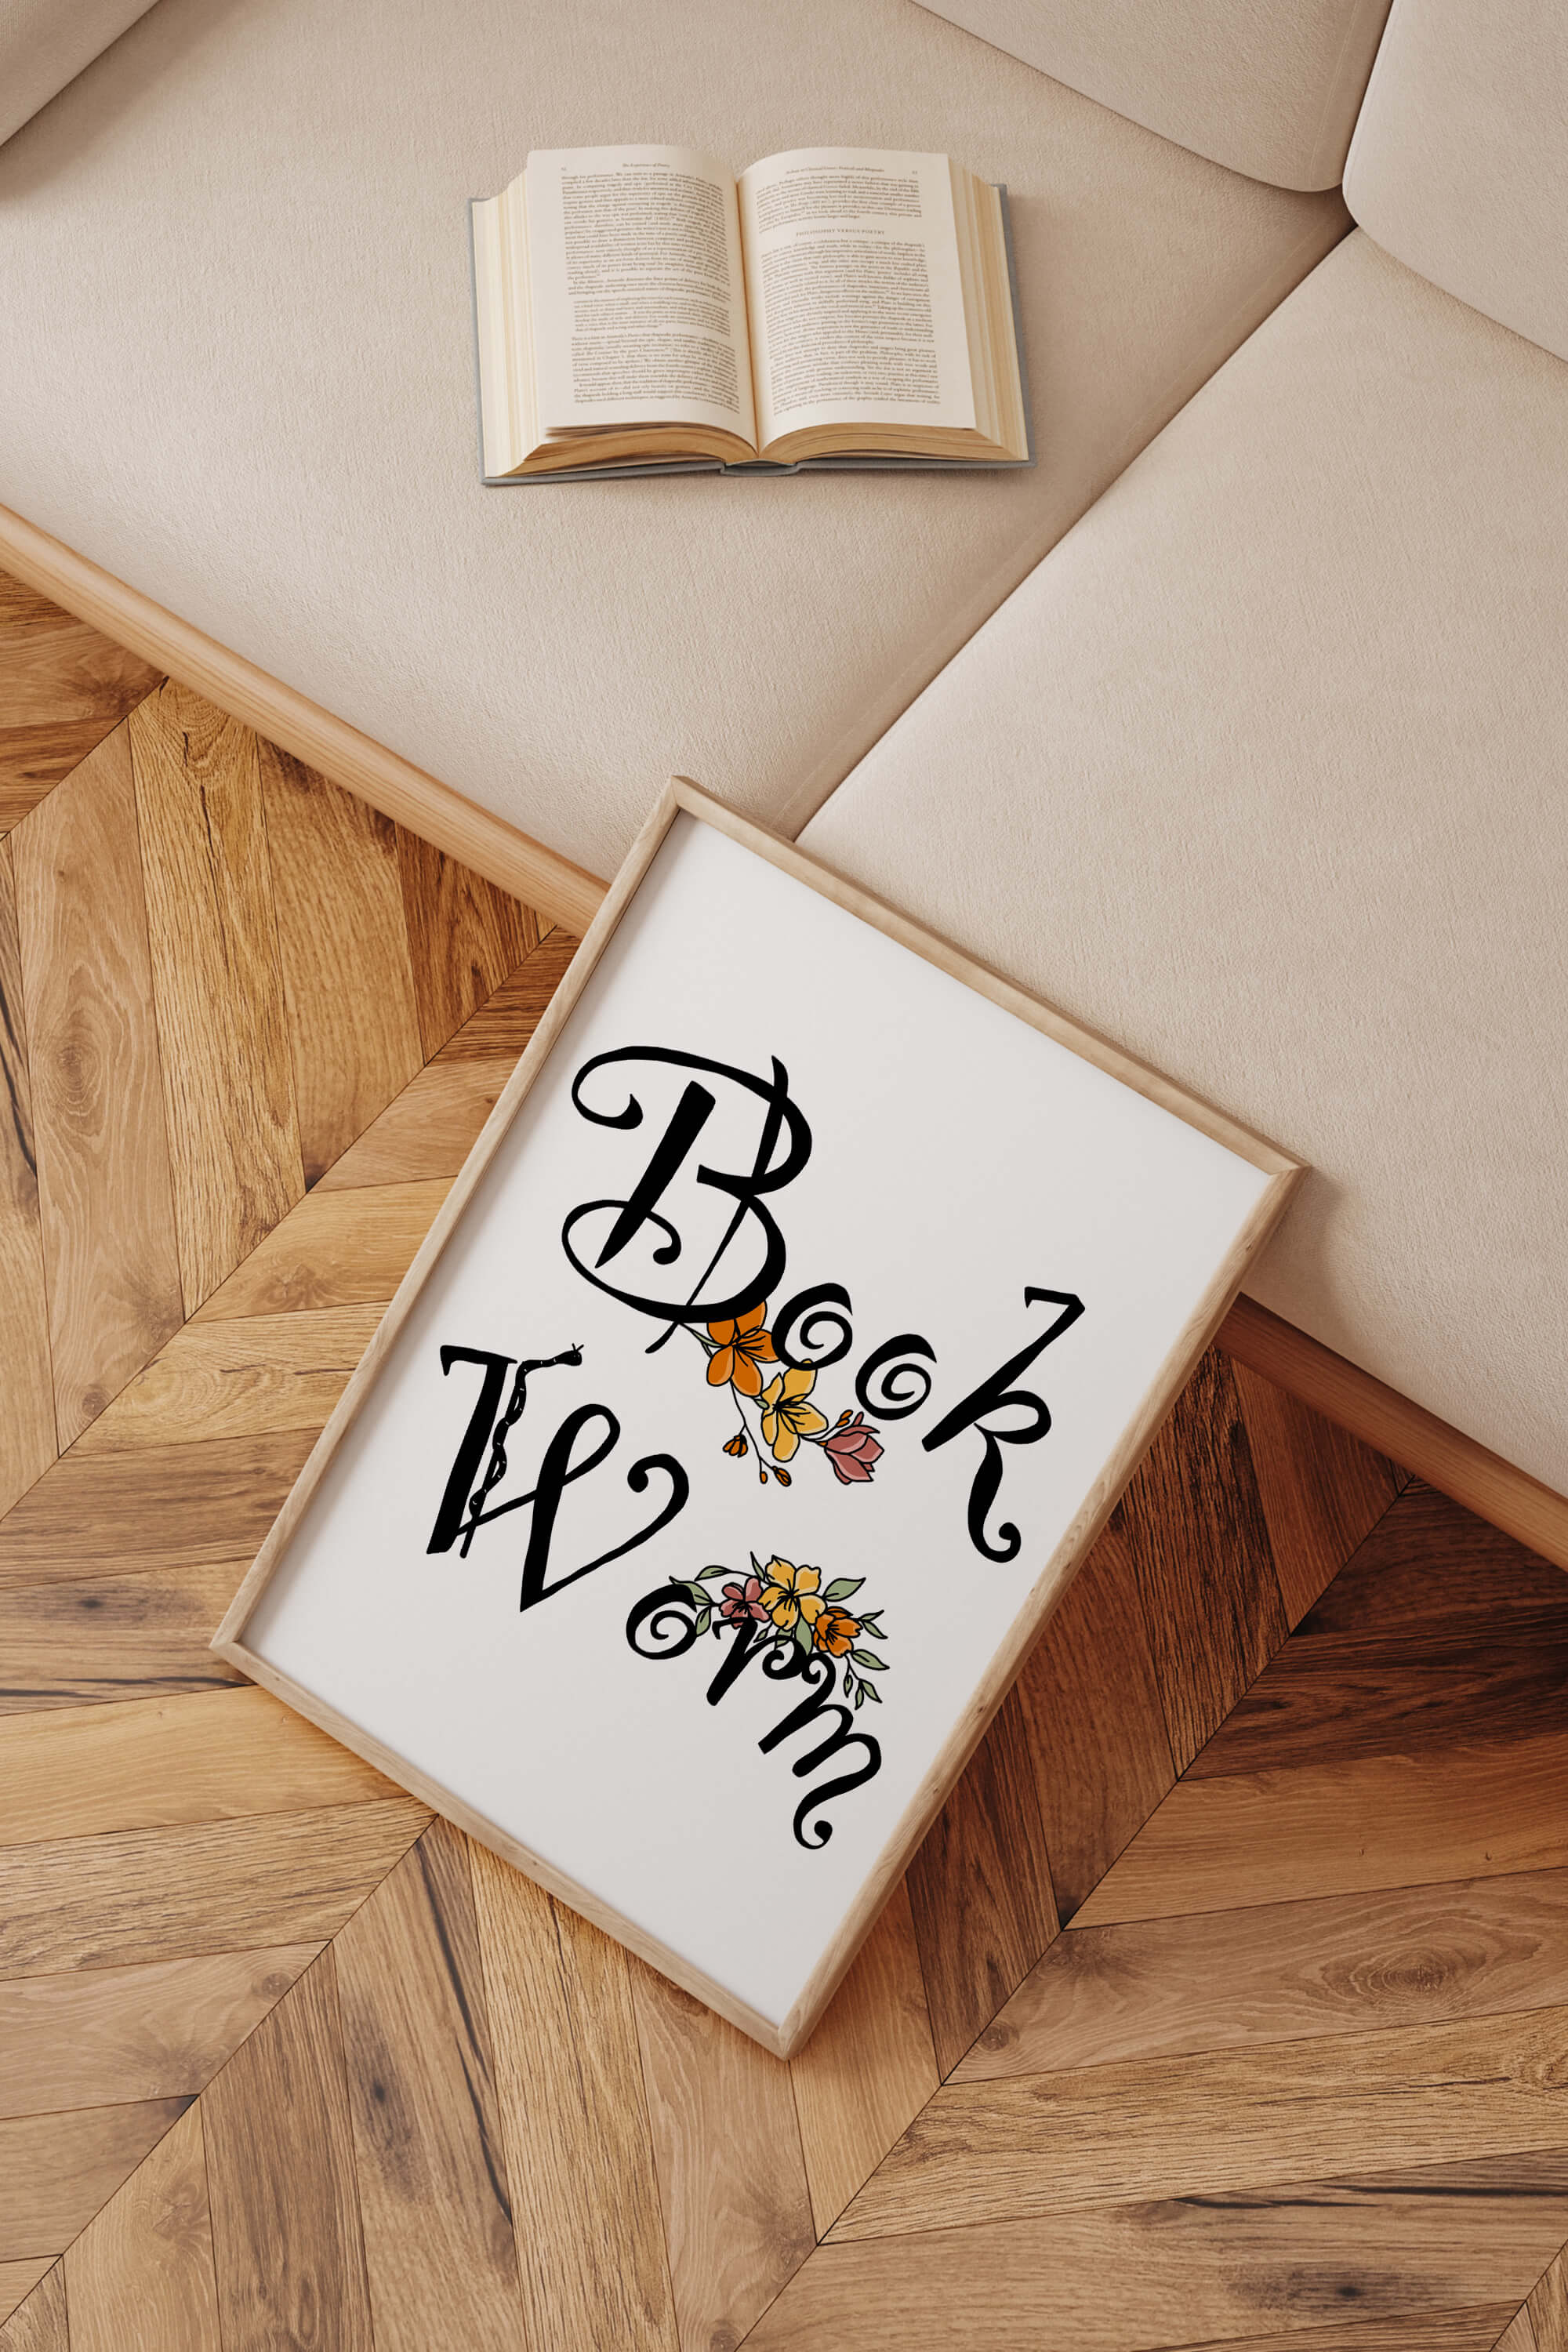 Transform your space with this limited edition literary masterpiece wall decor. An enchanting book corner print that beautifies your surroundings and immerses you in the fascinating world of books. Own a piece that celebrates the magic of literature in a truly exclusive and captivating way.